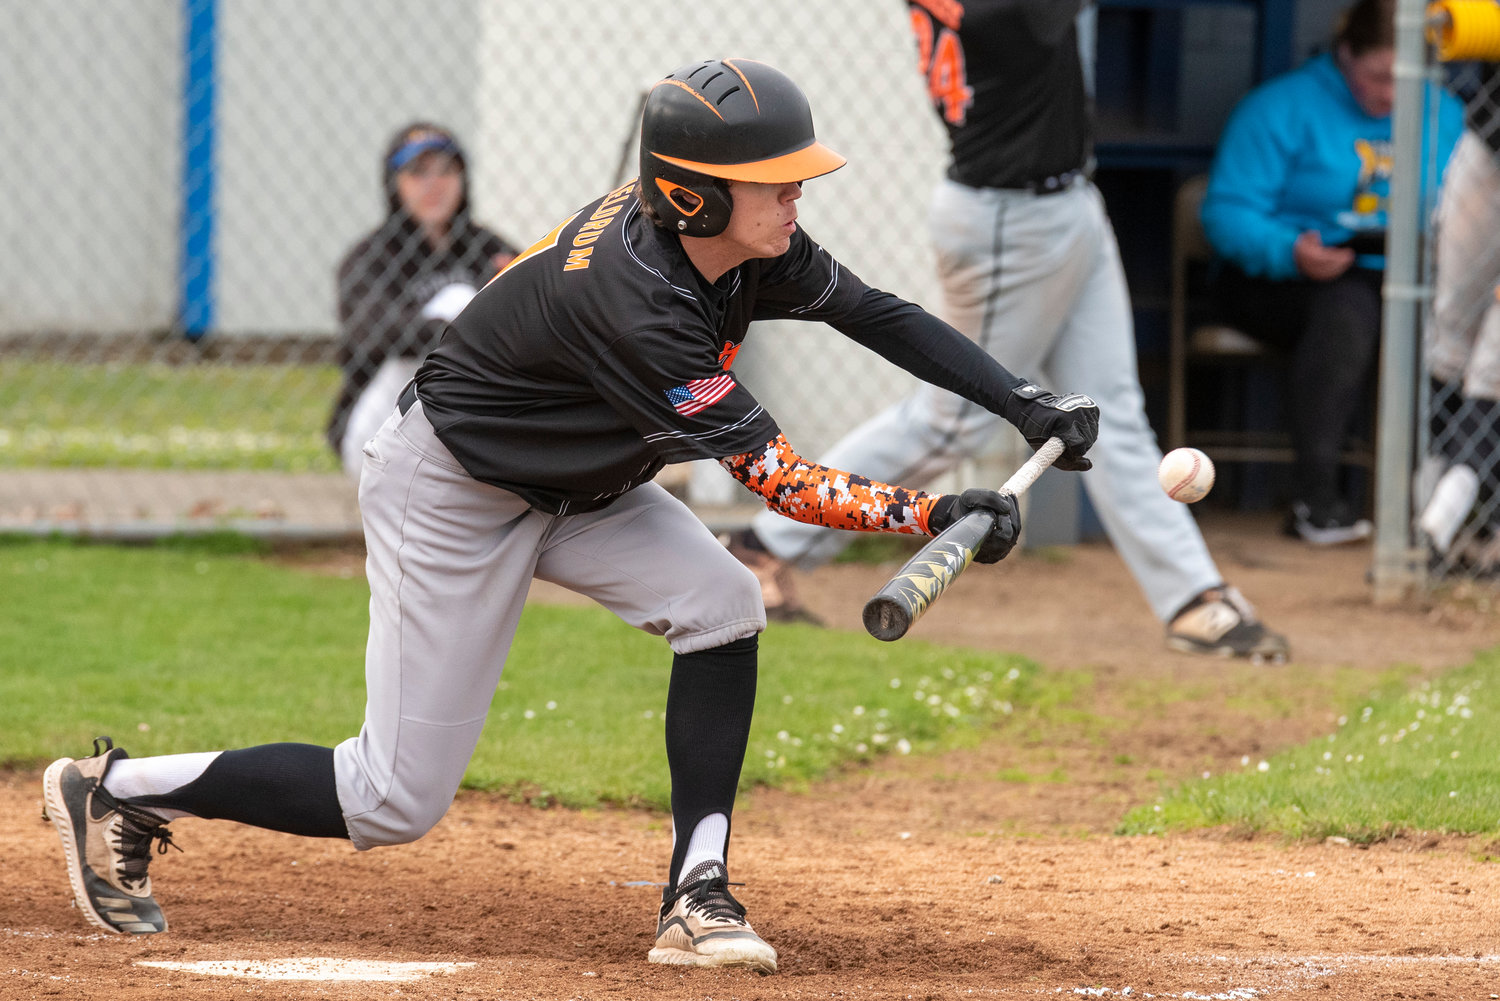 Rainier's Jake Meldrum sqaures up for a bunt during a district playoff play-in game against Wahkiakum on May 3.